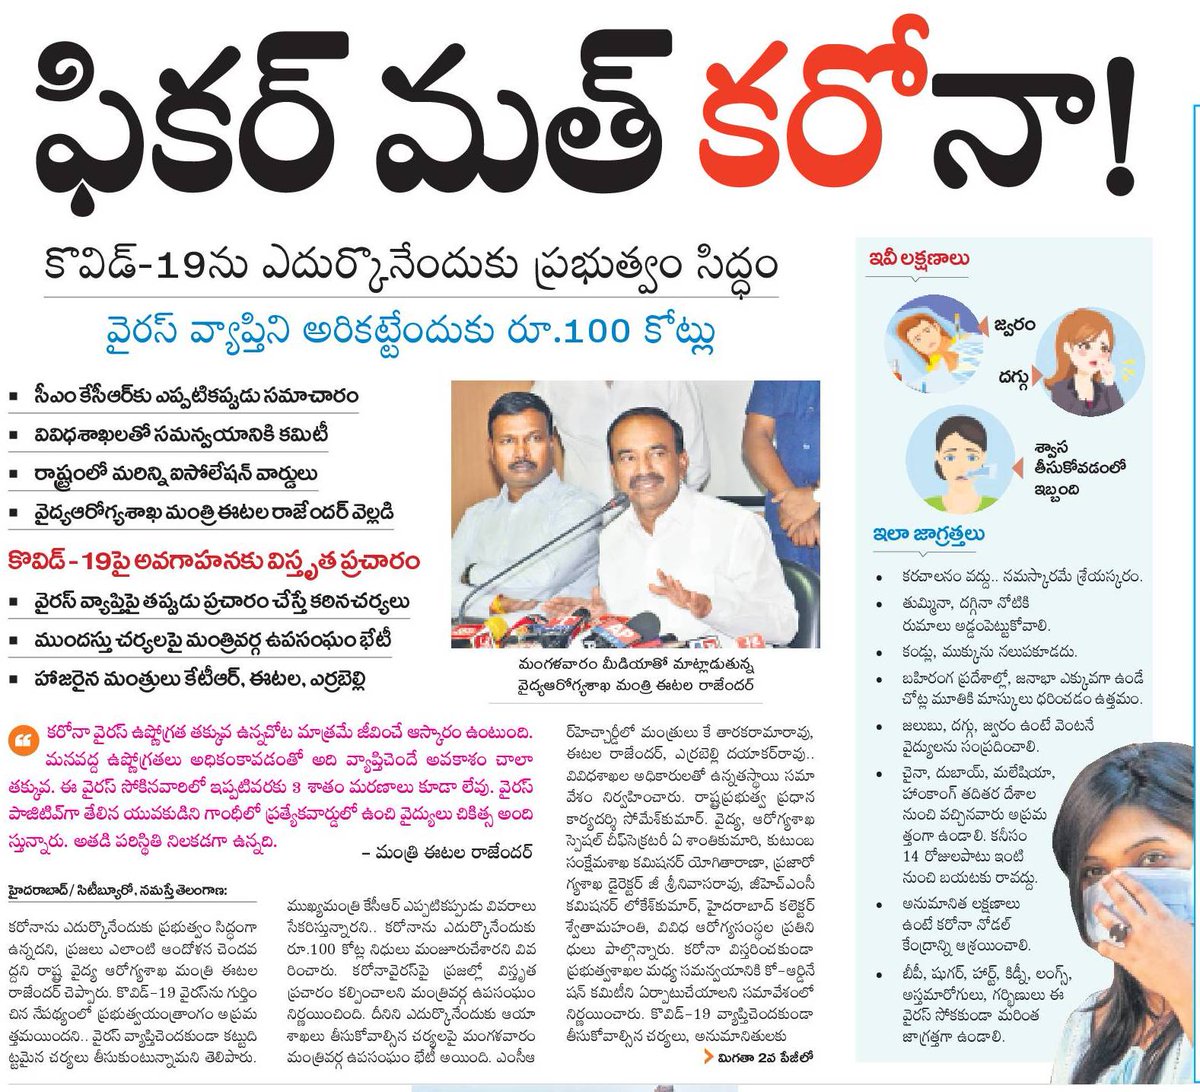 Why the TRS Government is being targetted although Corona is a Pandemic?This Thread is the answerNo one on this planet made these kinda irresponsible statements and bluffed their own citizens.Now we are suffering  #TsGovtFailedItsPeopleDated Mar 4, 5th